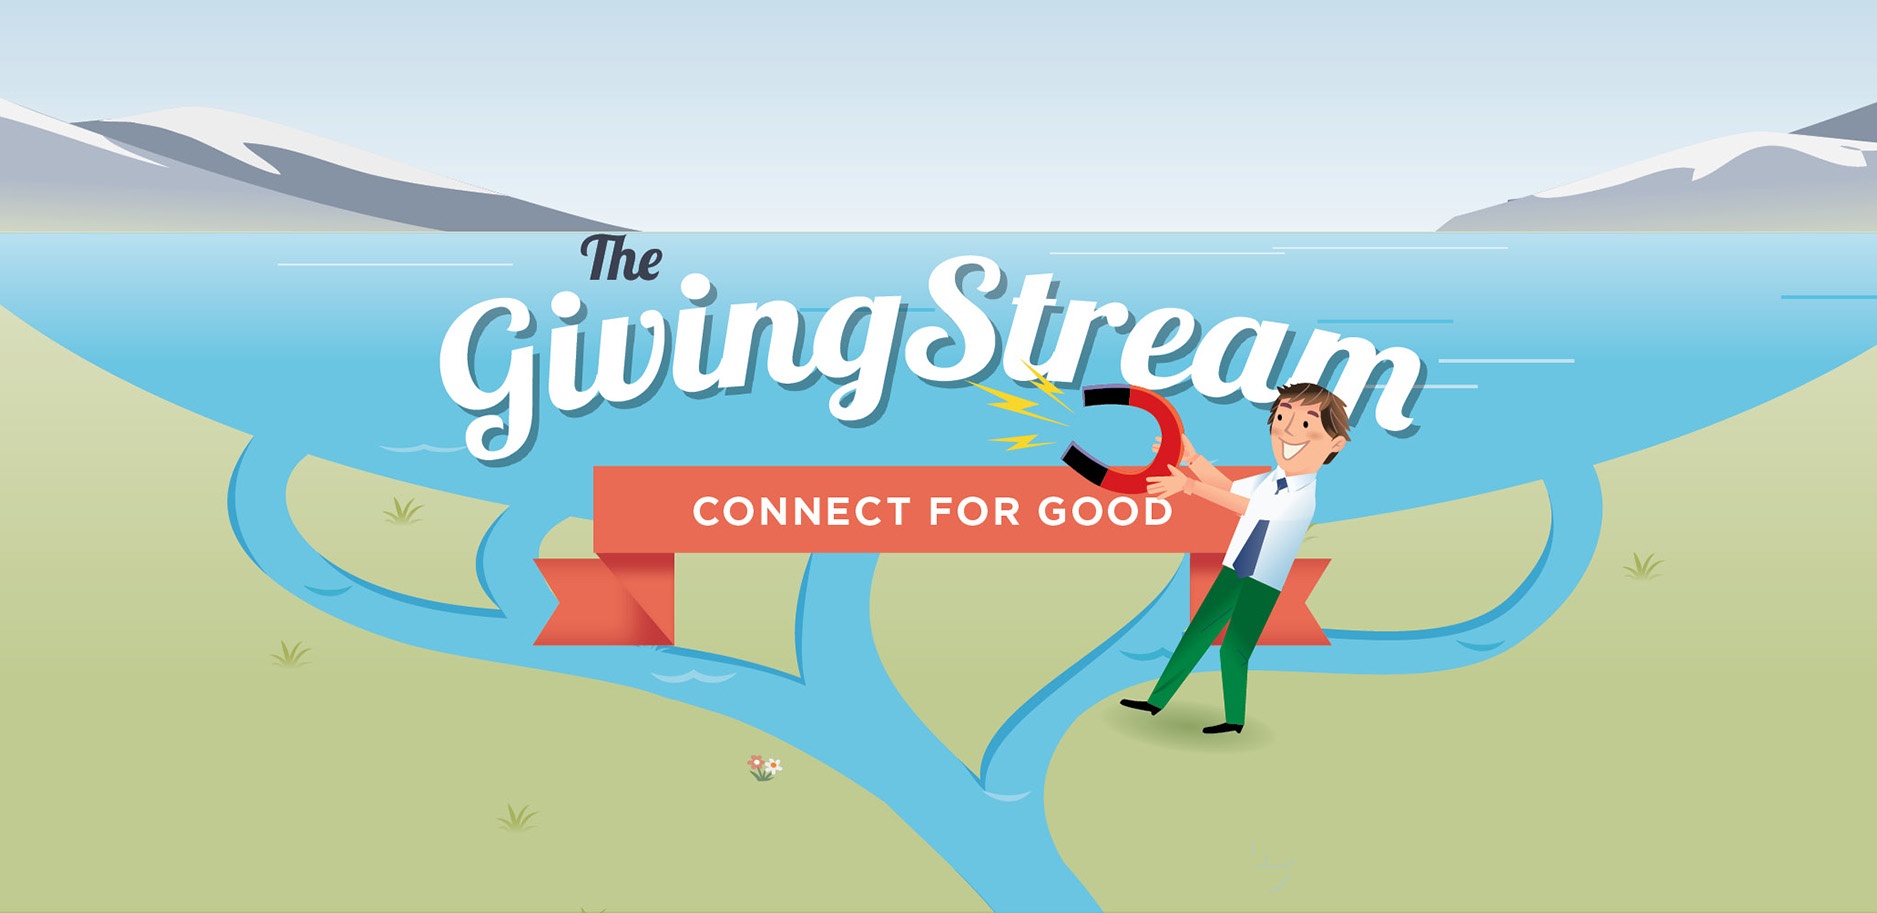 Blue North's Giving Stream connecting for good